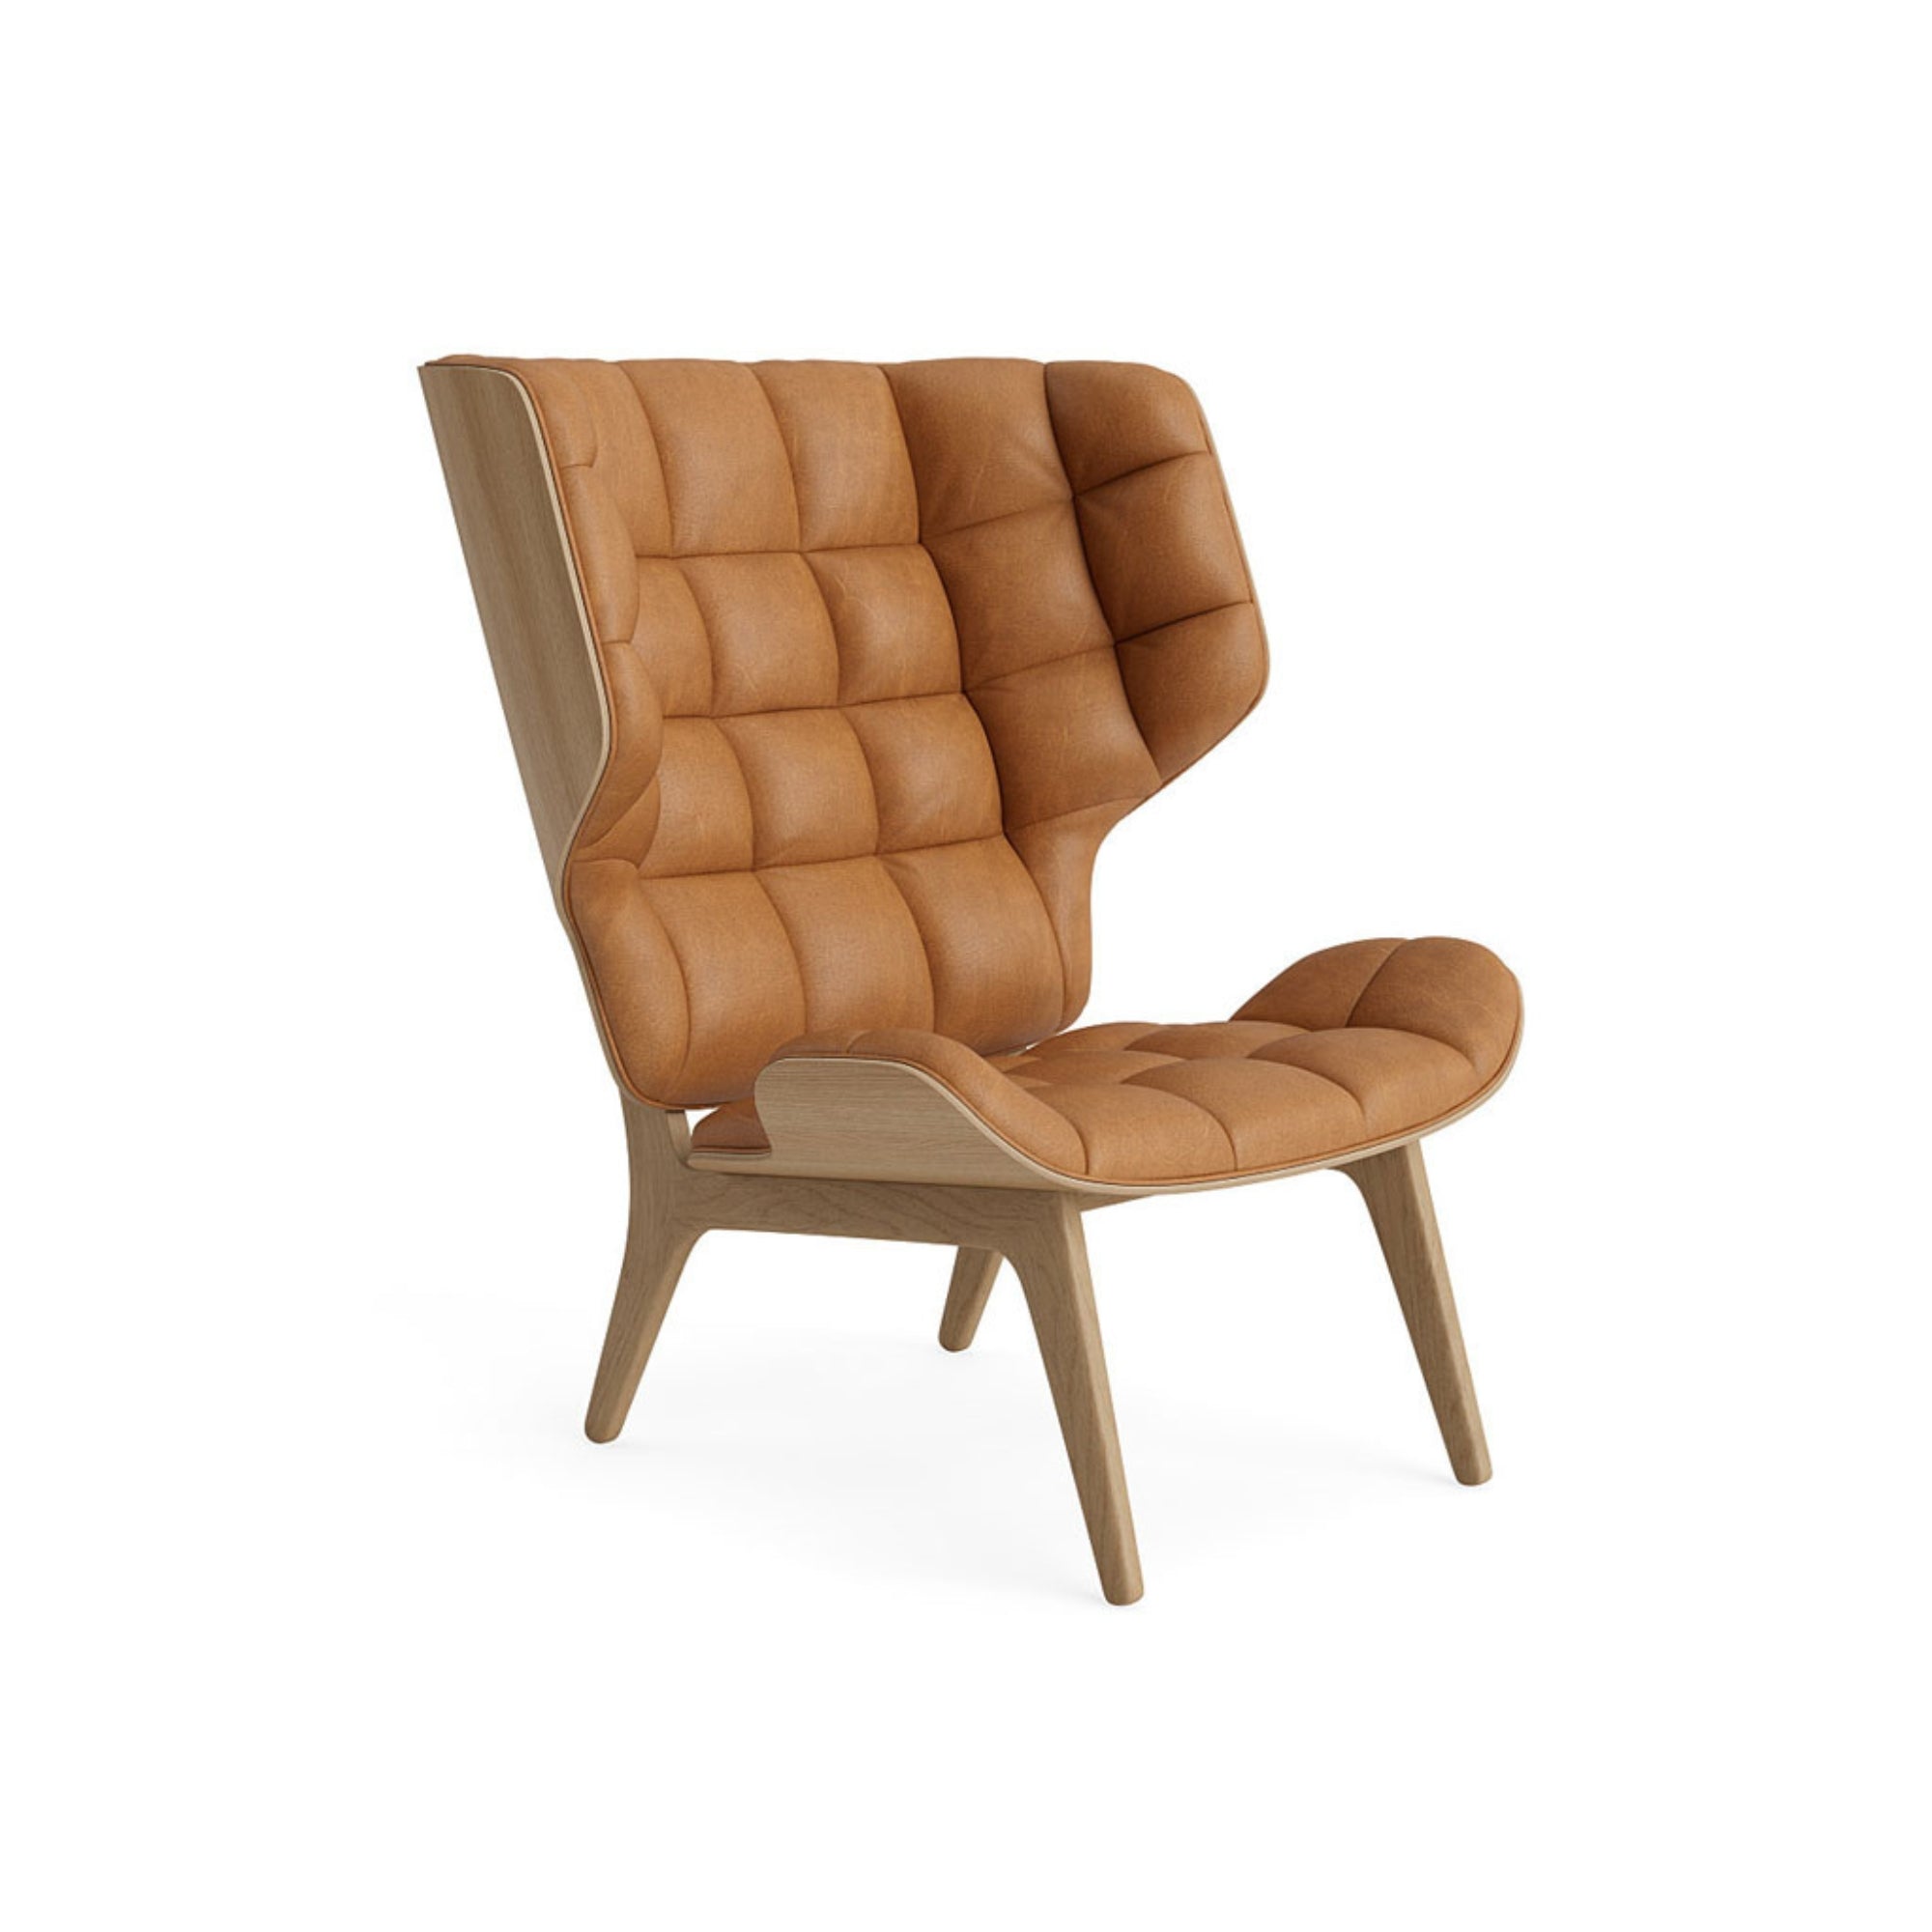 Mammoth Chair - Leather - THAT COOL LIVING